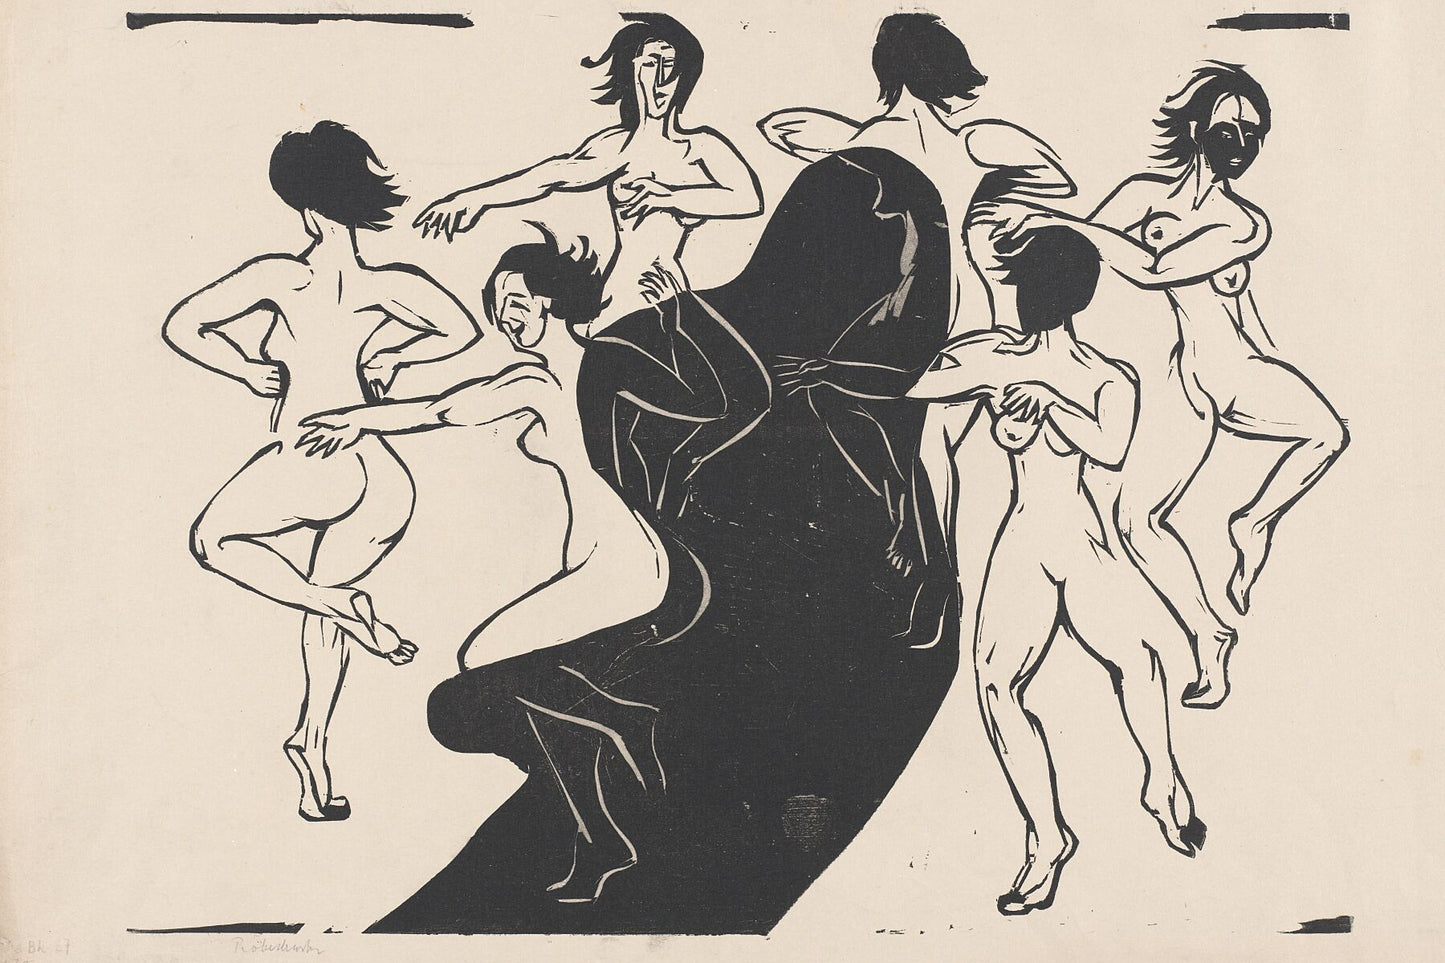 Nudes Dancing Around a Shadow by Ernst Ludwig Kirchner - 1936